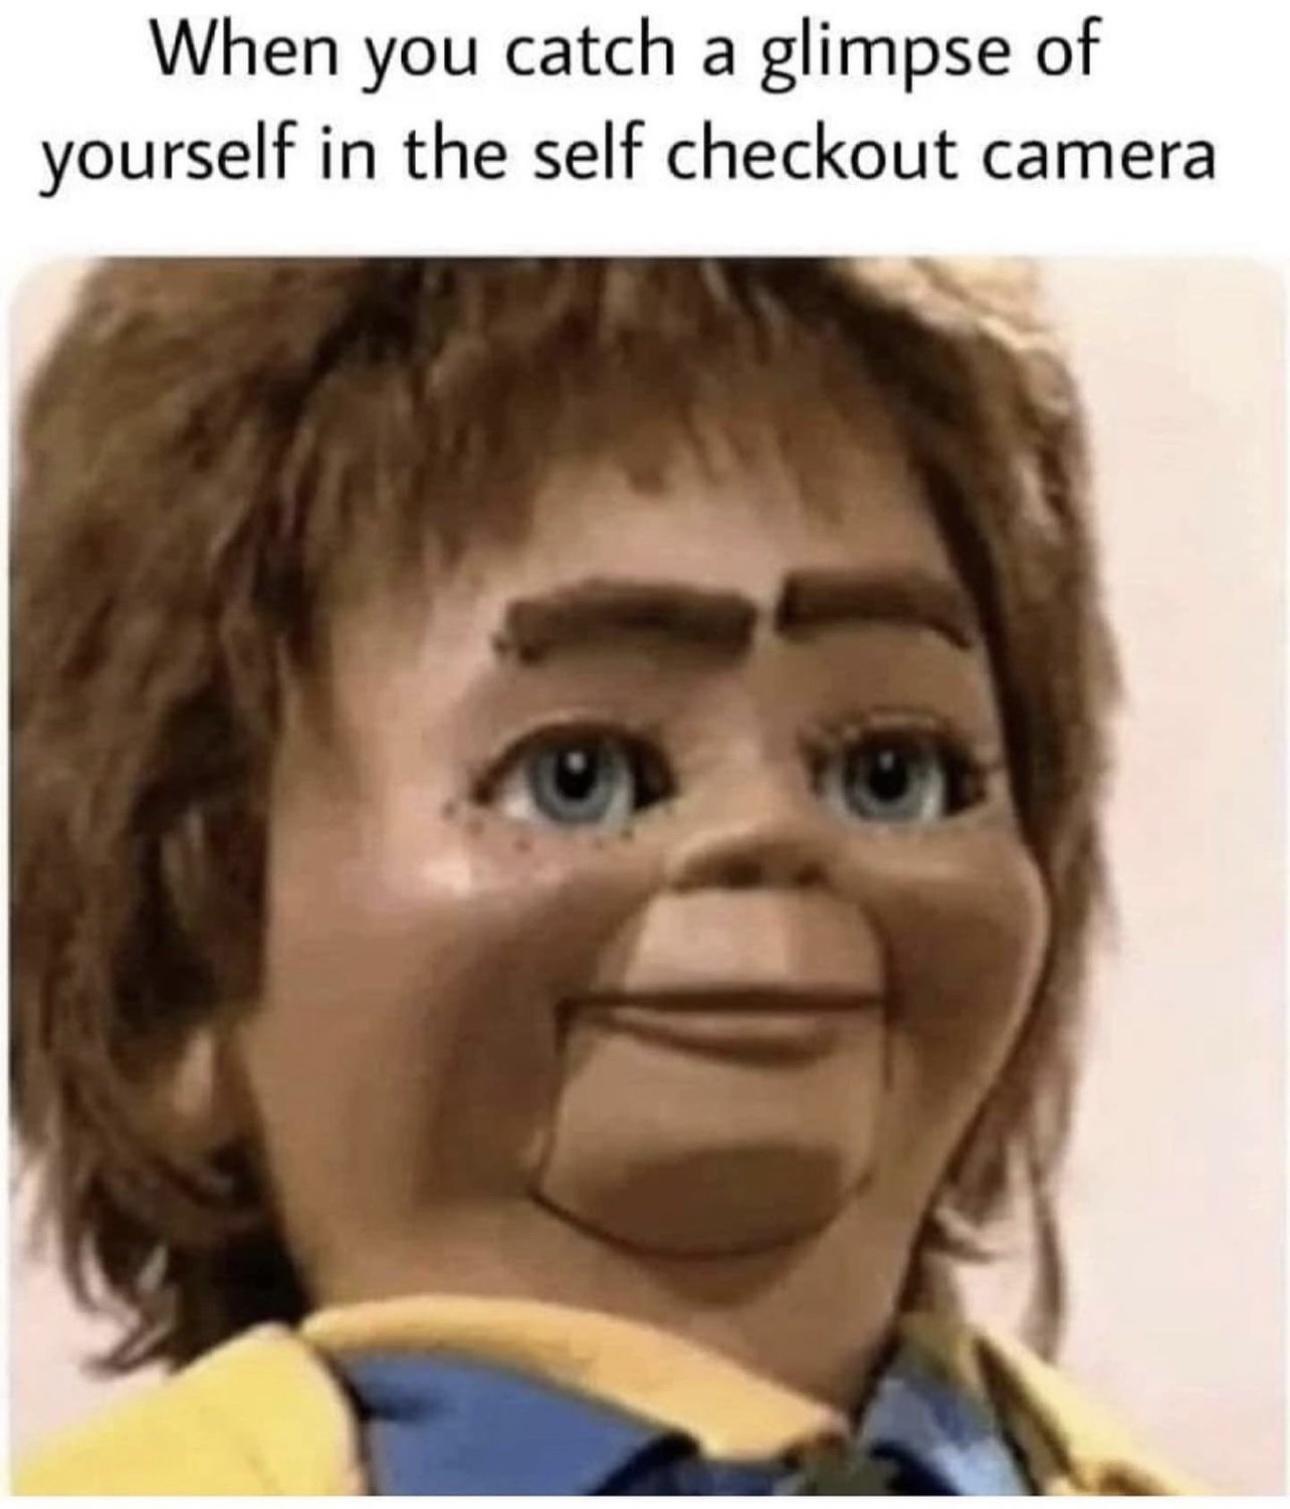 fresh memes - you catch a glimpse of yourself - When you catch a glimpse of yourself in the self checkout camera